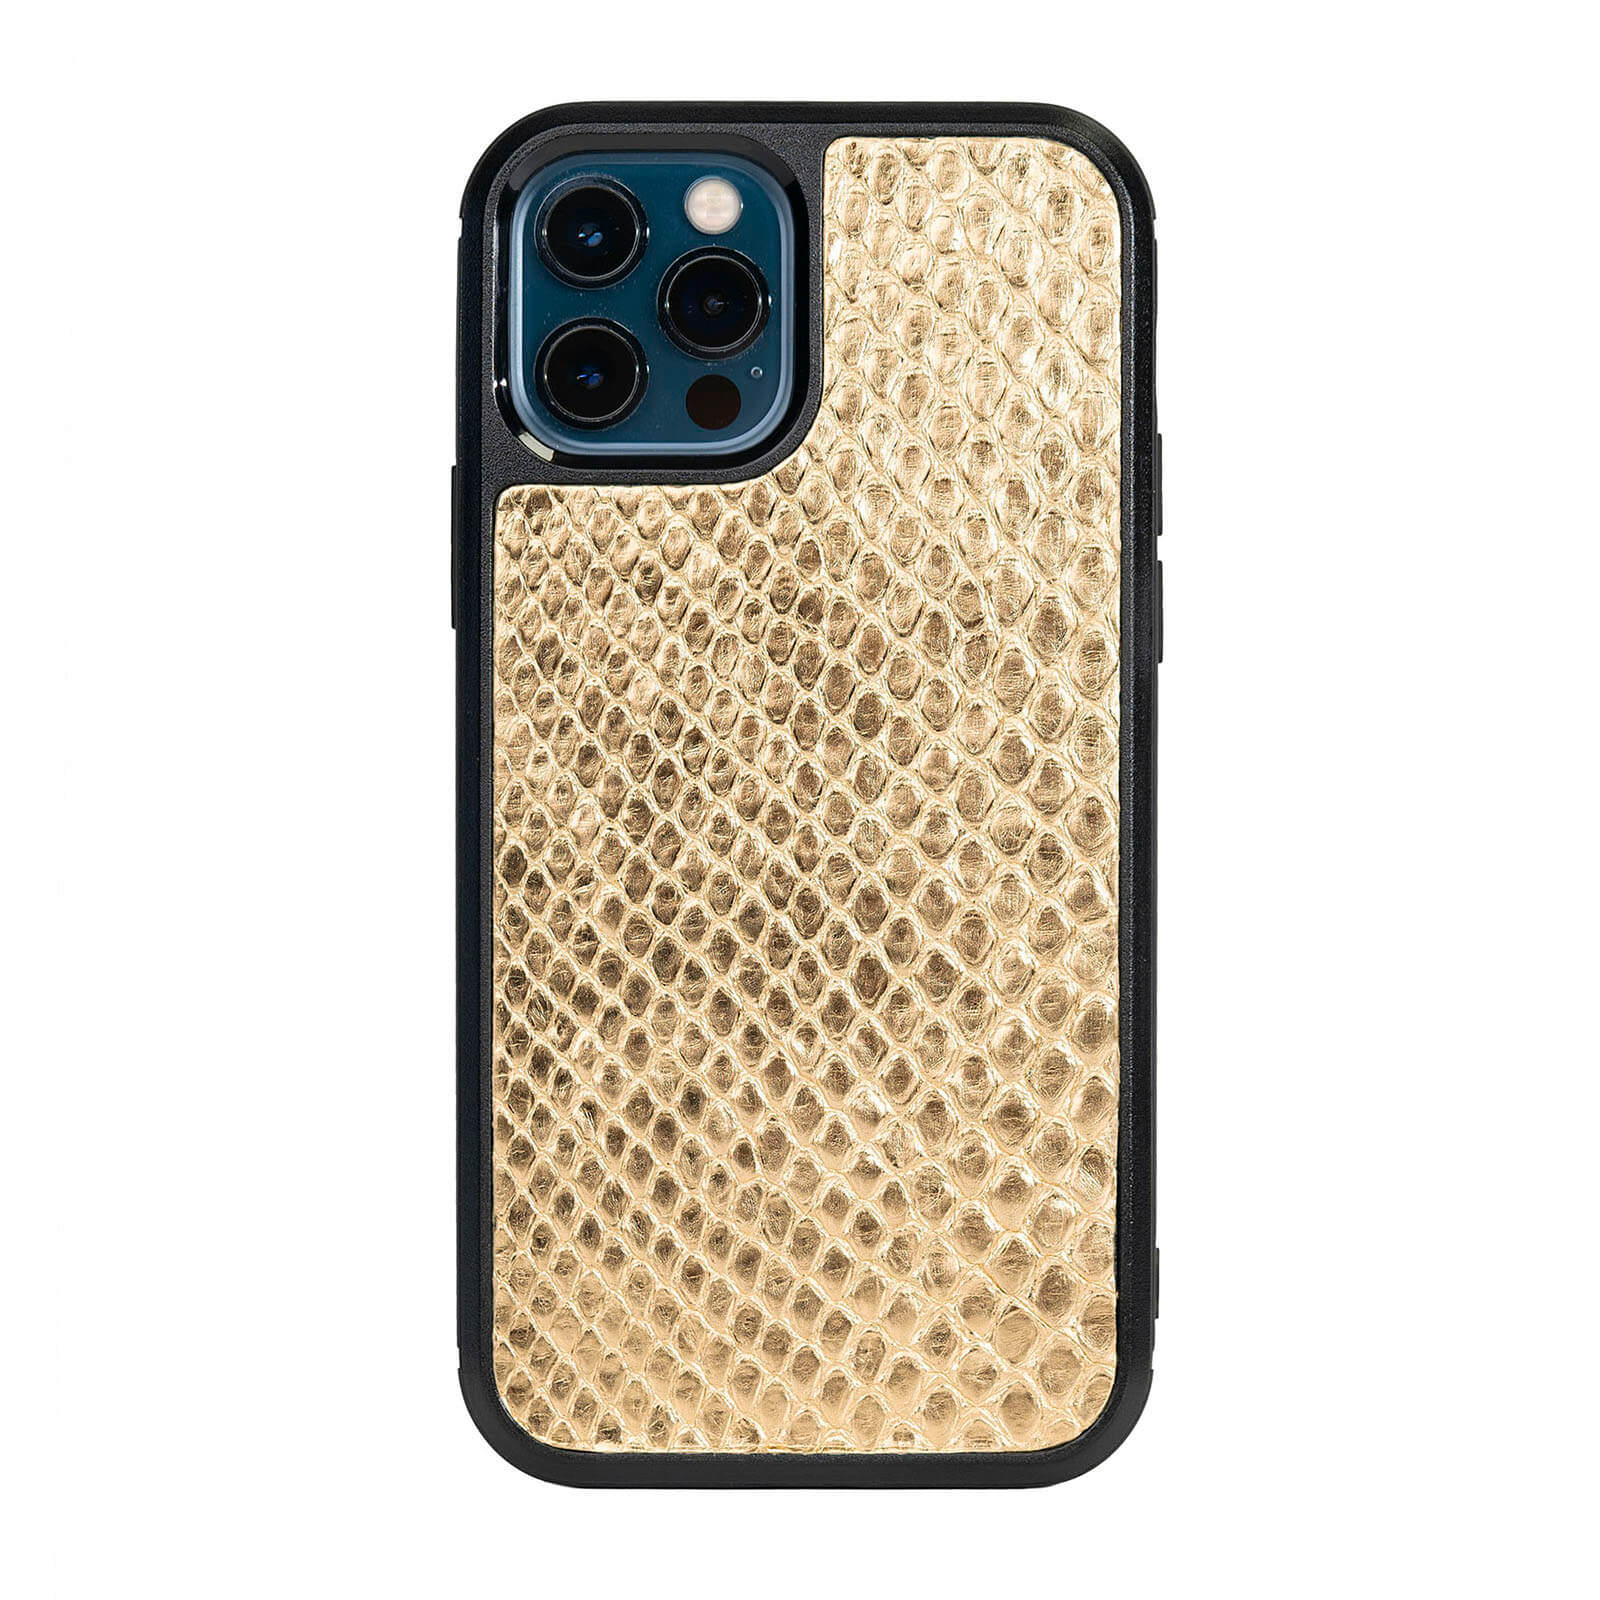 IPHONE 12 PRO & 12 CASES PYTHON GOLD